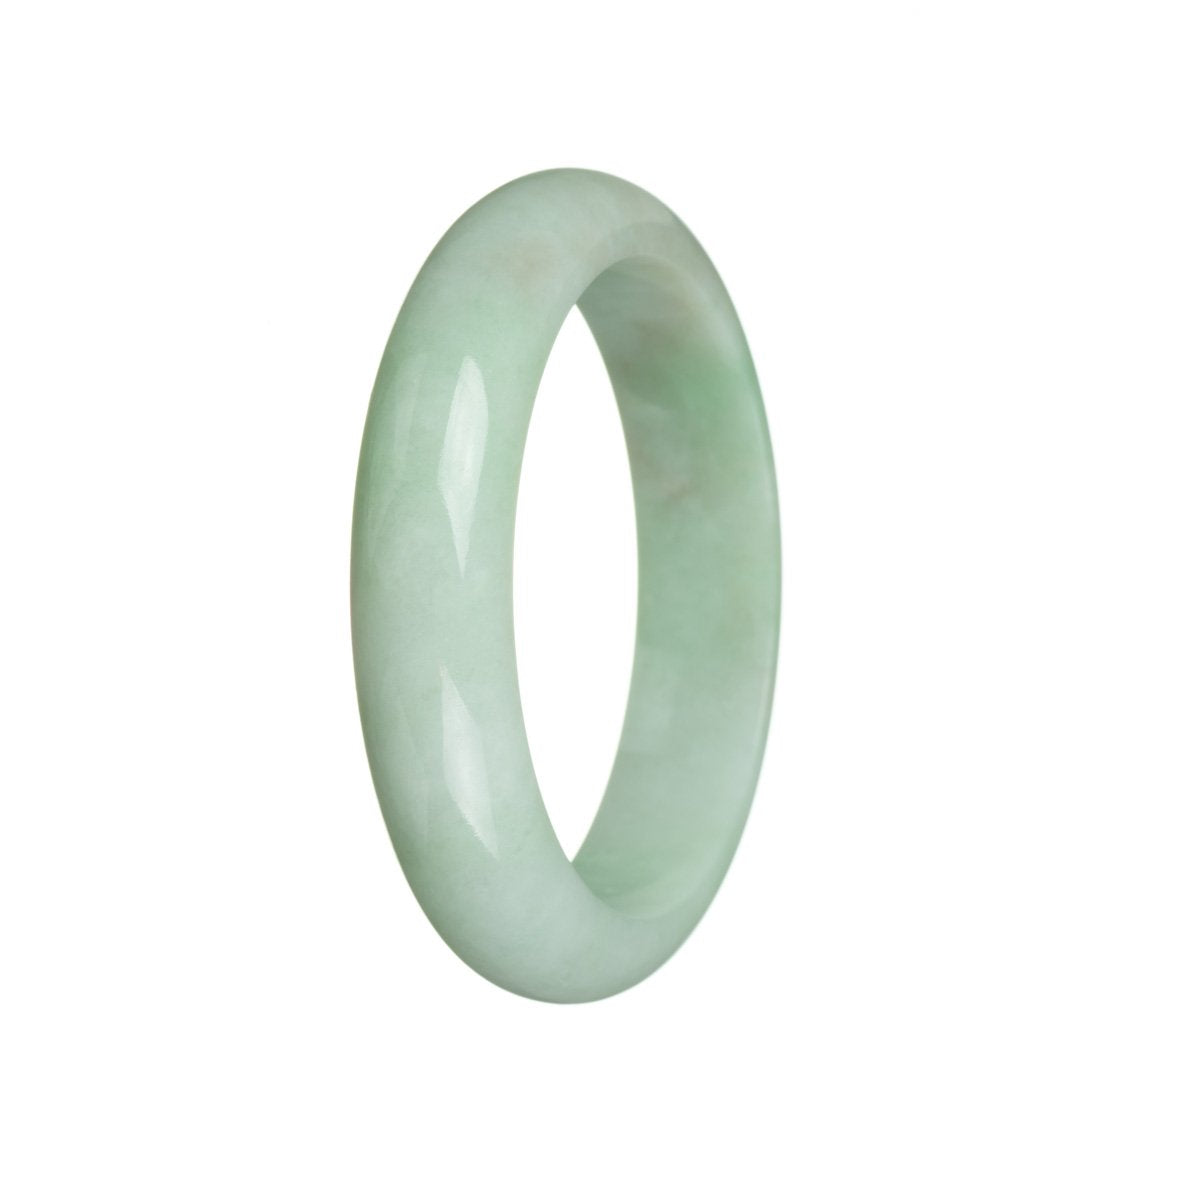 A light green jadeite jade bangle with a half moon design, measuring 58mm in size.